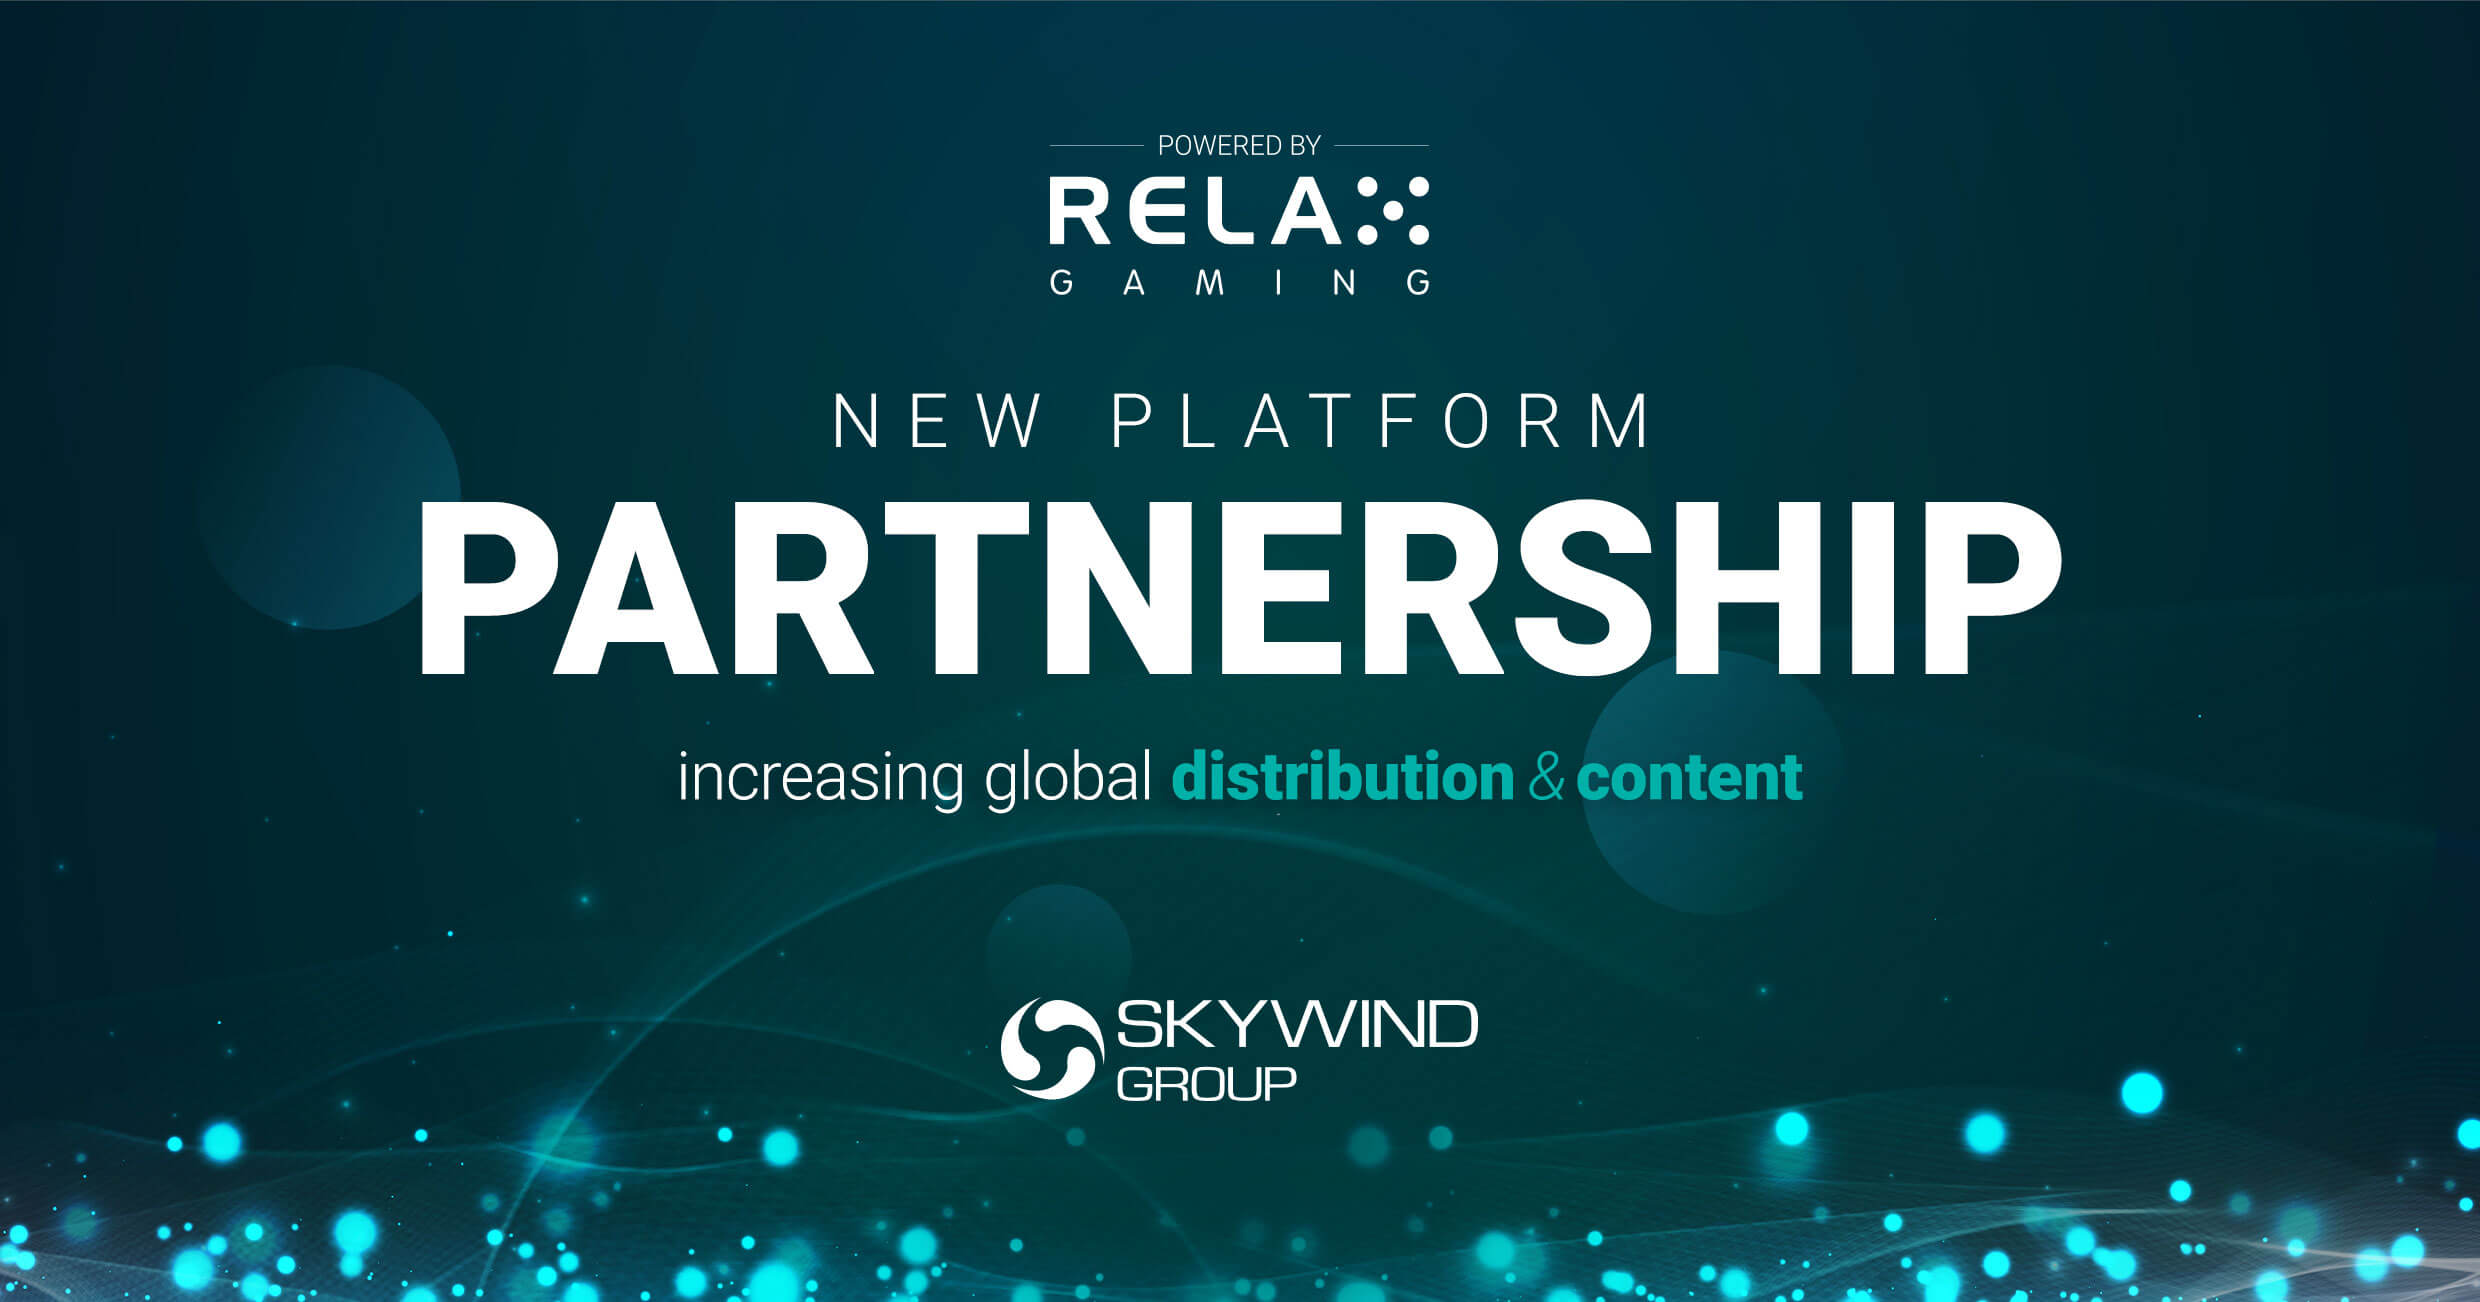 Relax Gaming Expands Powered By Partnership with Skywind Group